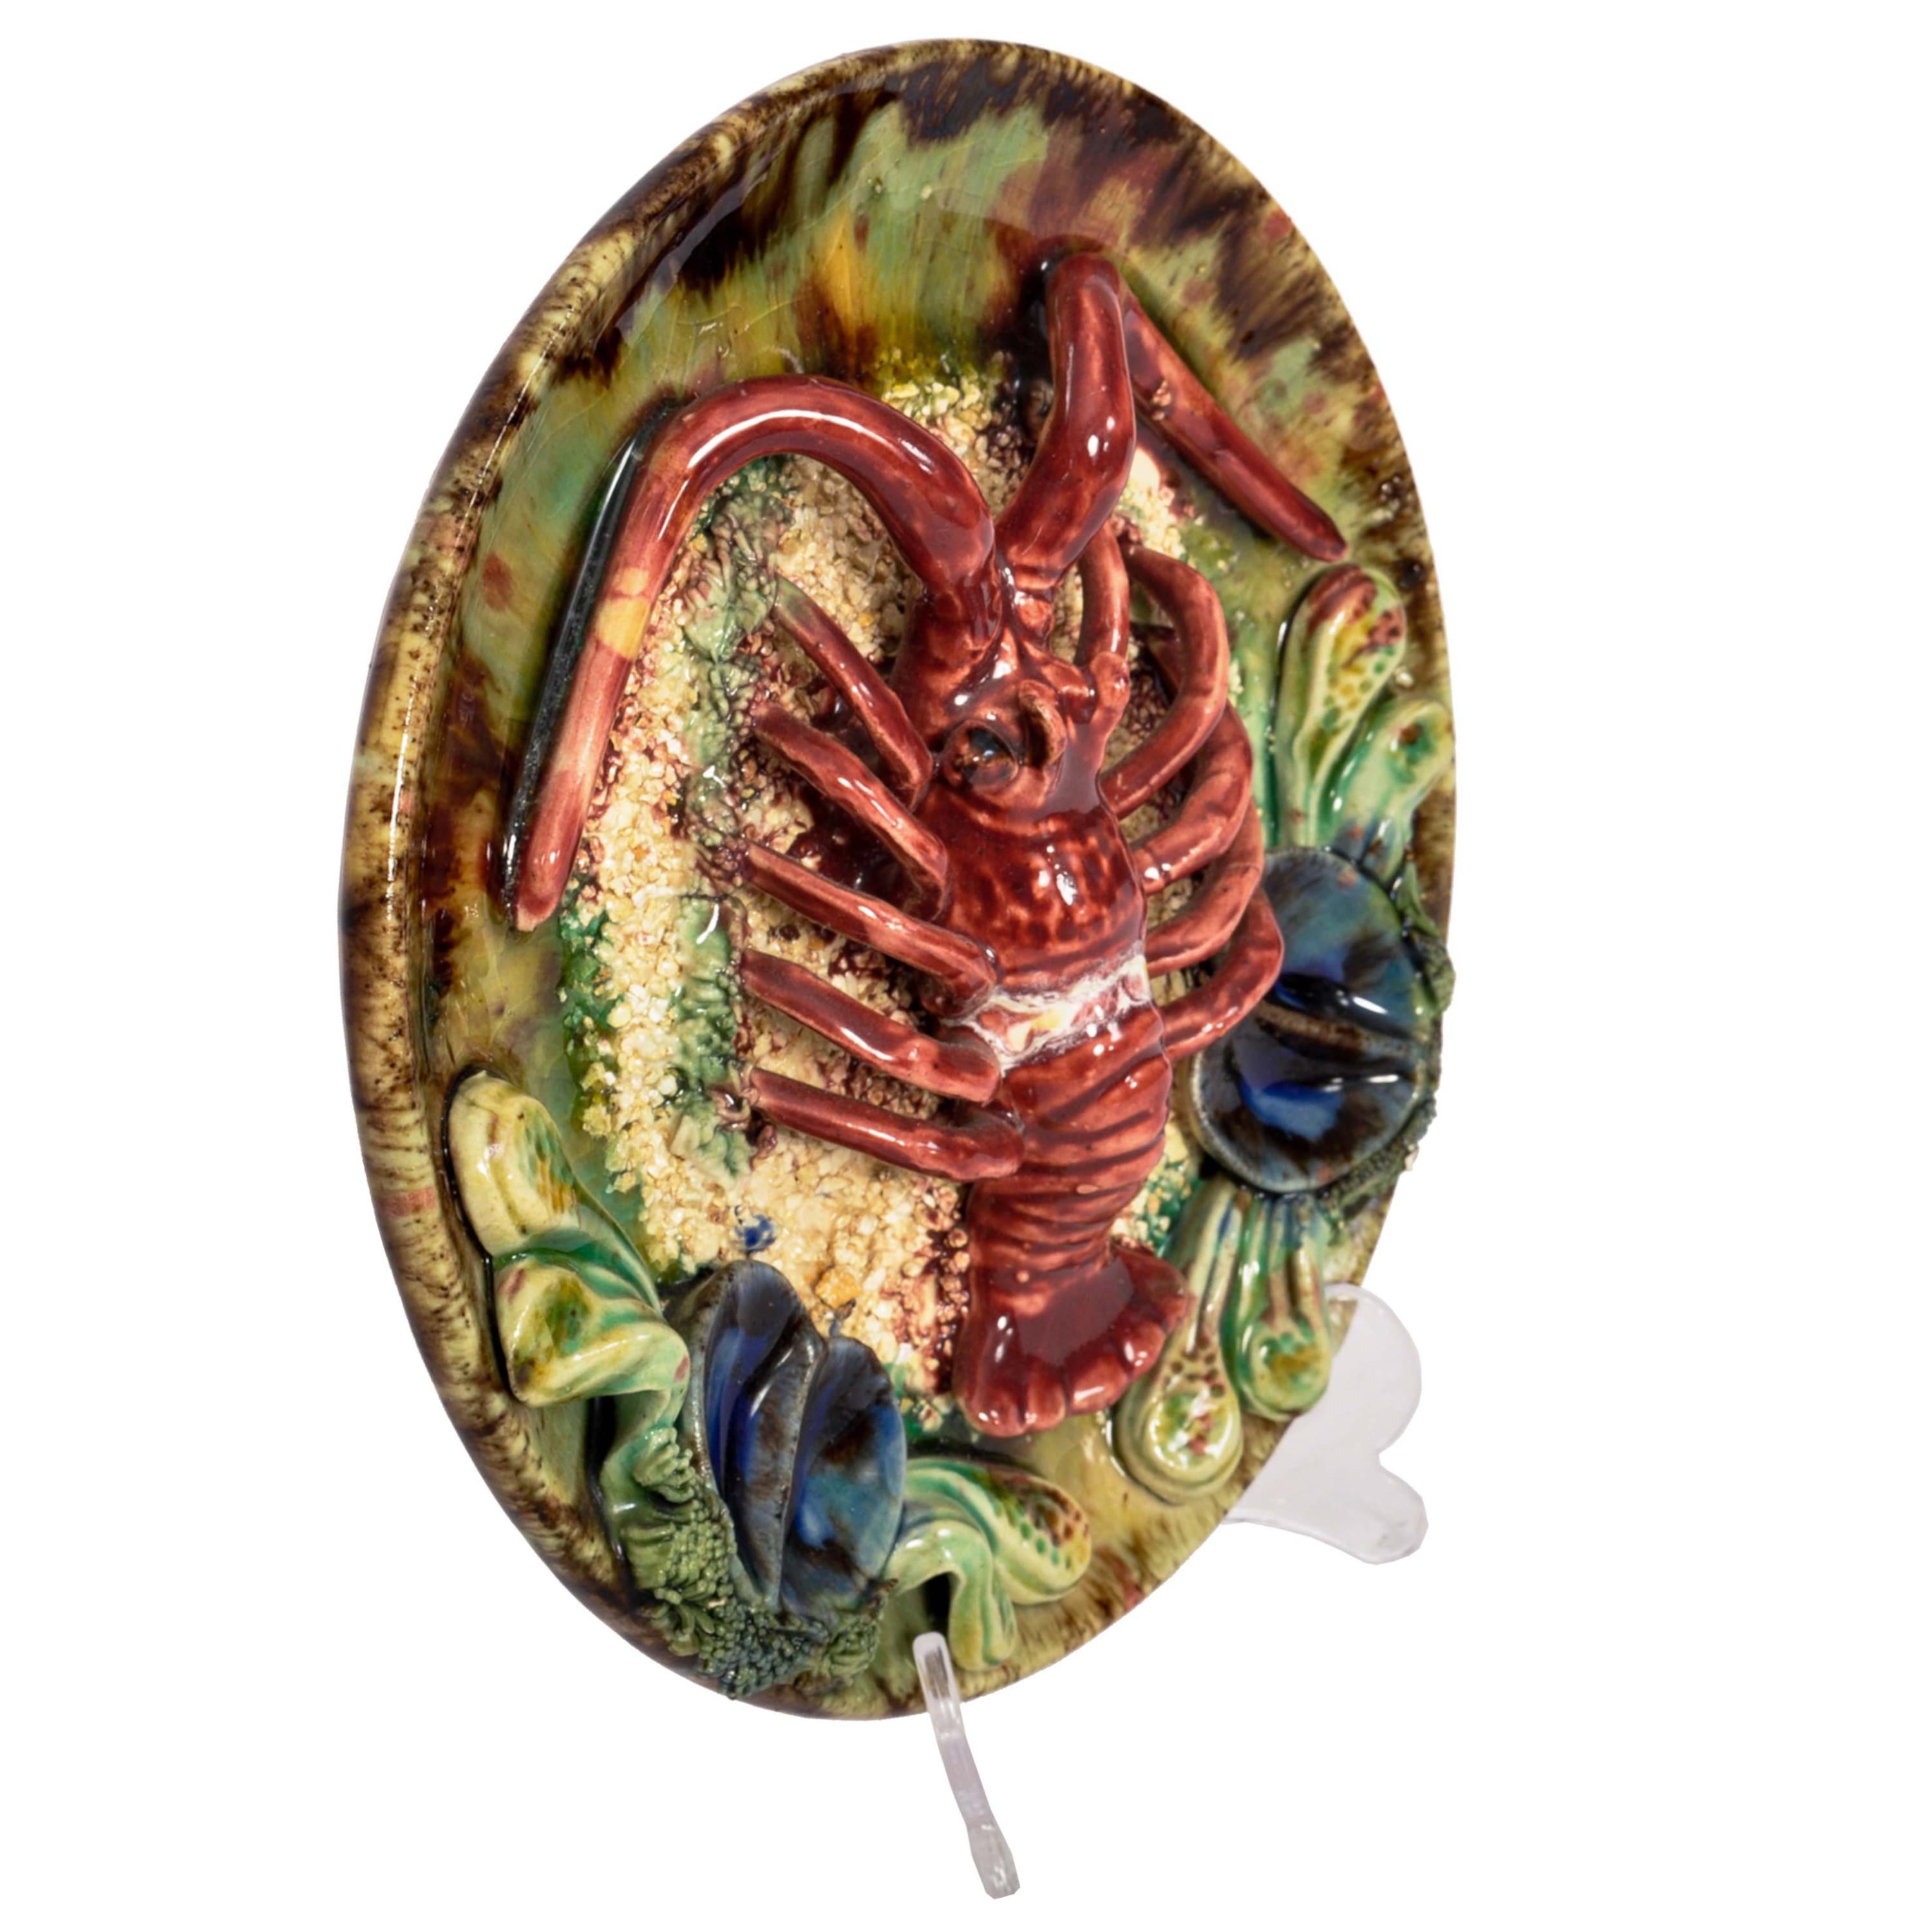 A good antique Palissy Ware style Portuguese majolica wall plate, circa 1900.
The plate decorated with a large lobster to the center resting on a textured ground and flanked by two sets of mussel shells. The plate having a a manganese glaze with